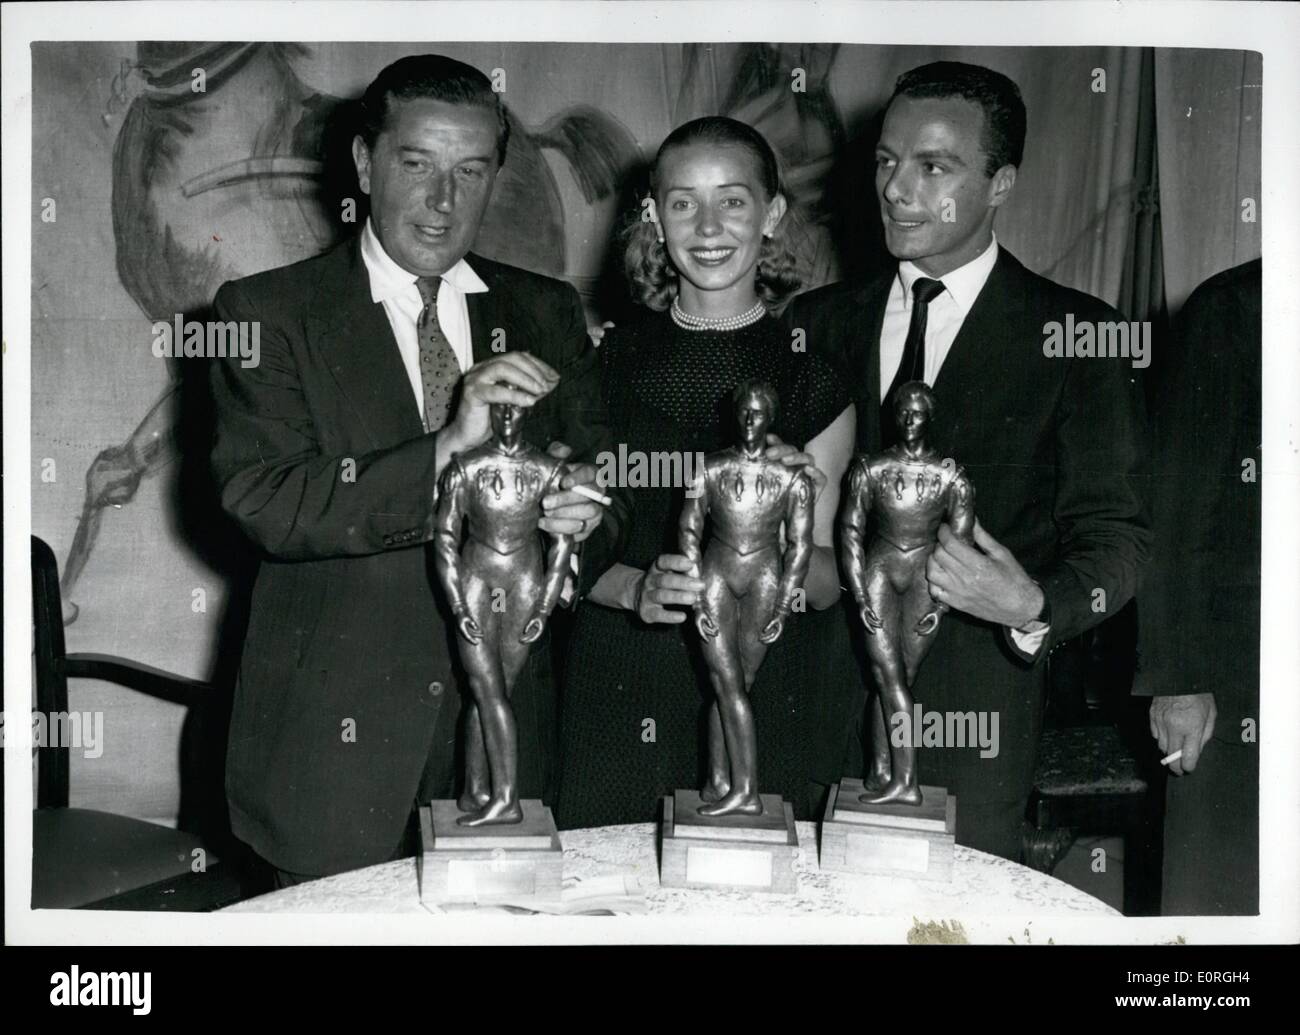 Aug. 08, 1959 - Presentation of the Anton Dolin Awards.: Her Serene Highness Princess Antionette of Monaco this afternoon presented the Anton Dolin Awards at the Circular Rooms, Army and Navy Stores. The awards are presented to the people who, in Dolin's judgement - ballet in the past year. Photo shows the three winners with their awards a this afternoon - L-R: - Frederick Ashton (winner of choreographer award; Nadia Nerina and John Gilpin the da award winners. Stock Photo